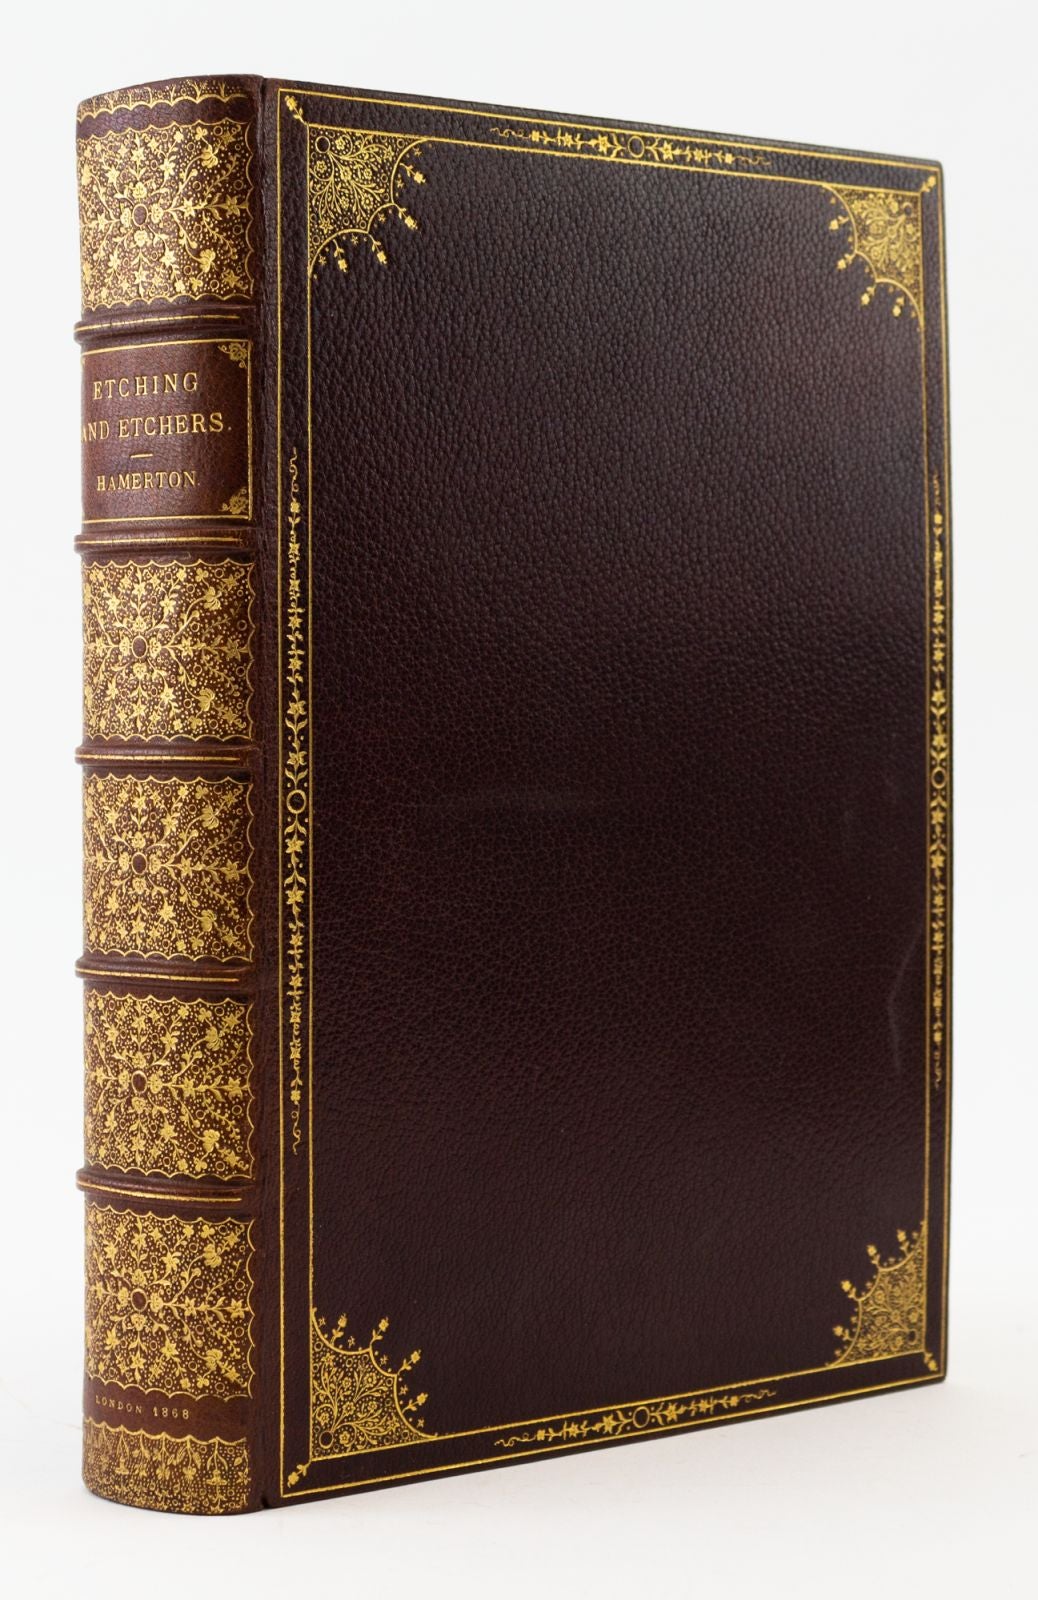 ETCHING AND ETCHERS by ART OF ETCHING, PHILIP GILBERT HAMERTON, BINDINGS -  on Phillip J. Pirages Fine Books and Manuscripts